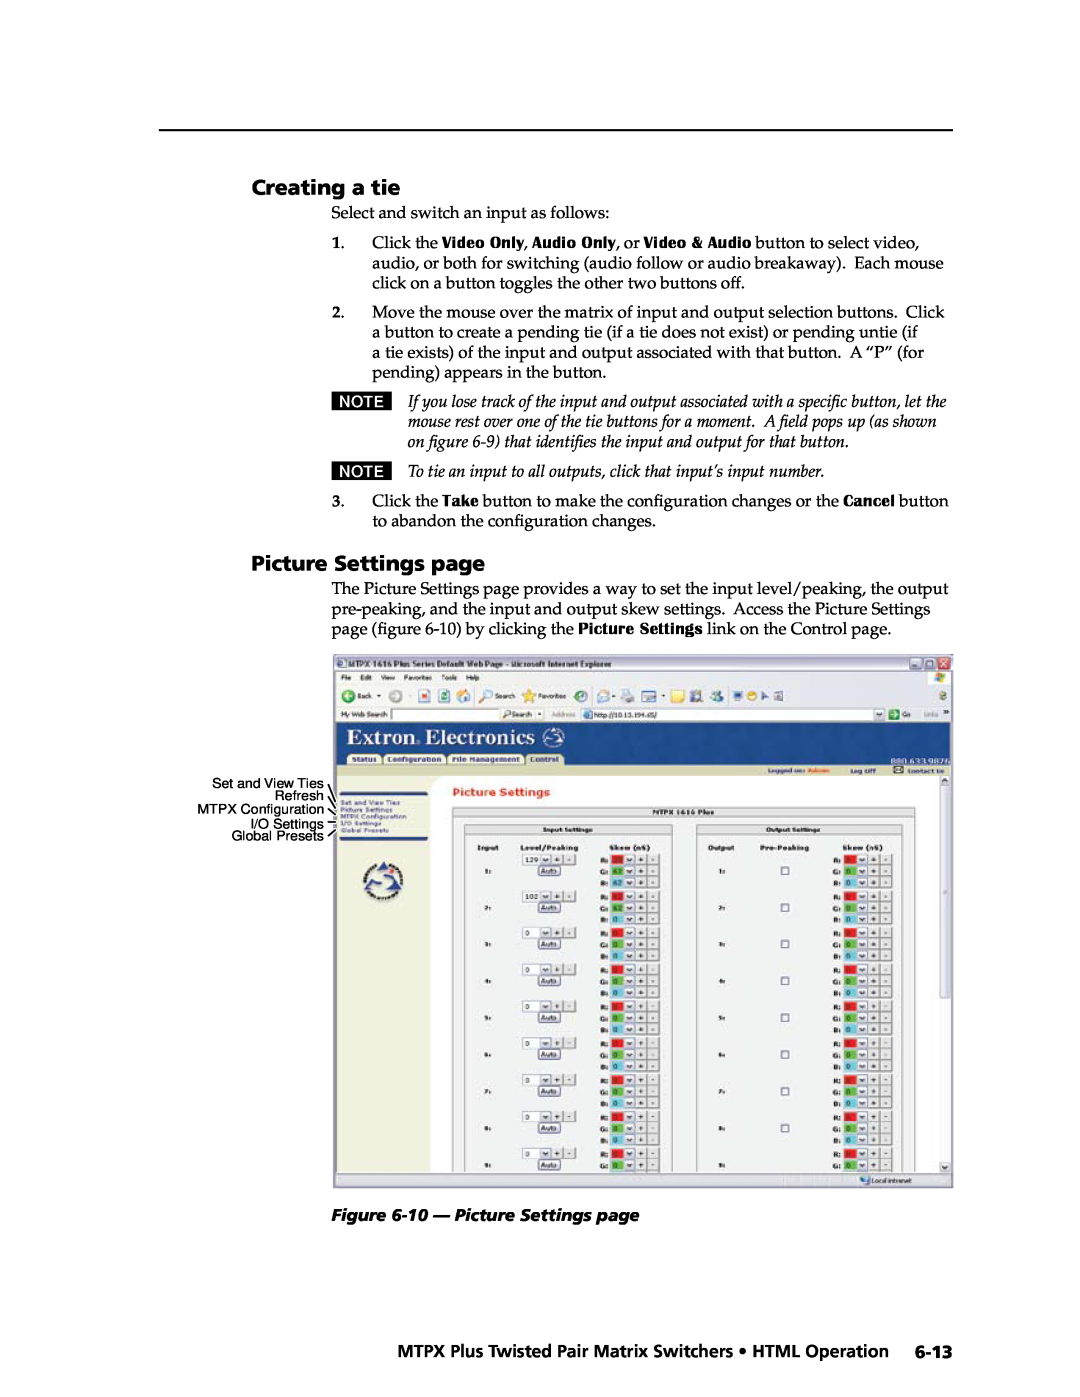 Extron electronic MTPX Plus Series manual Creating a tie, 10 - Picture Settings page 